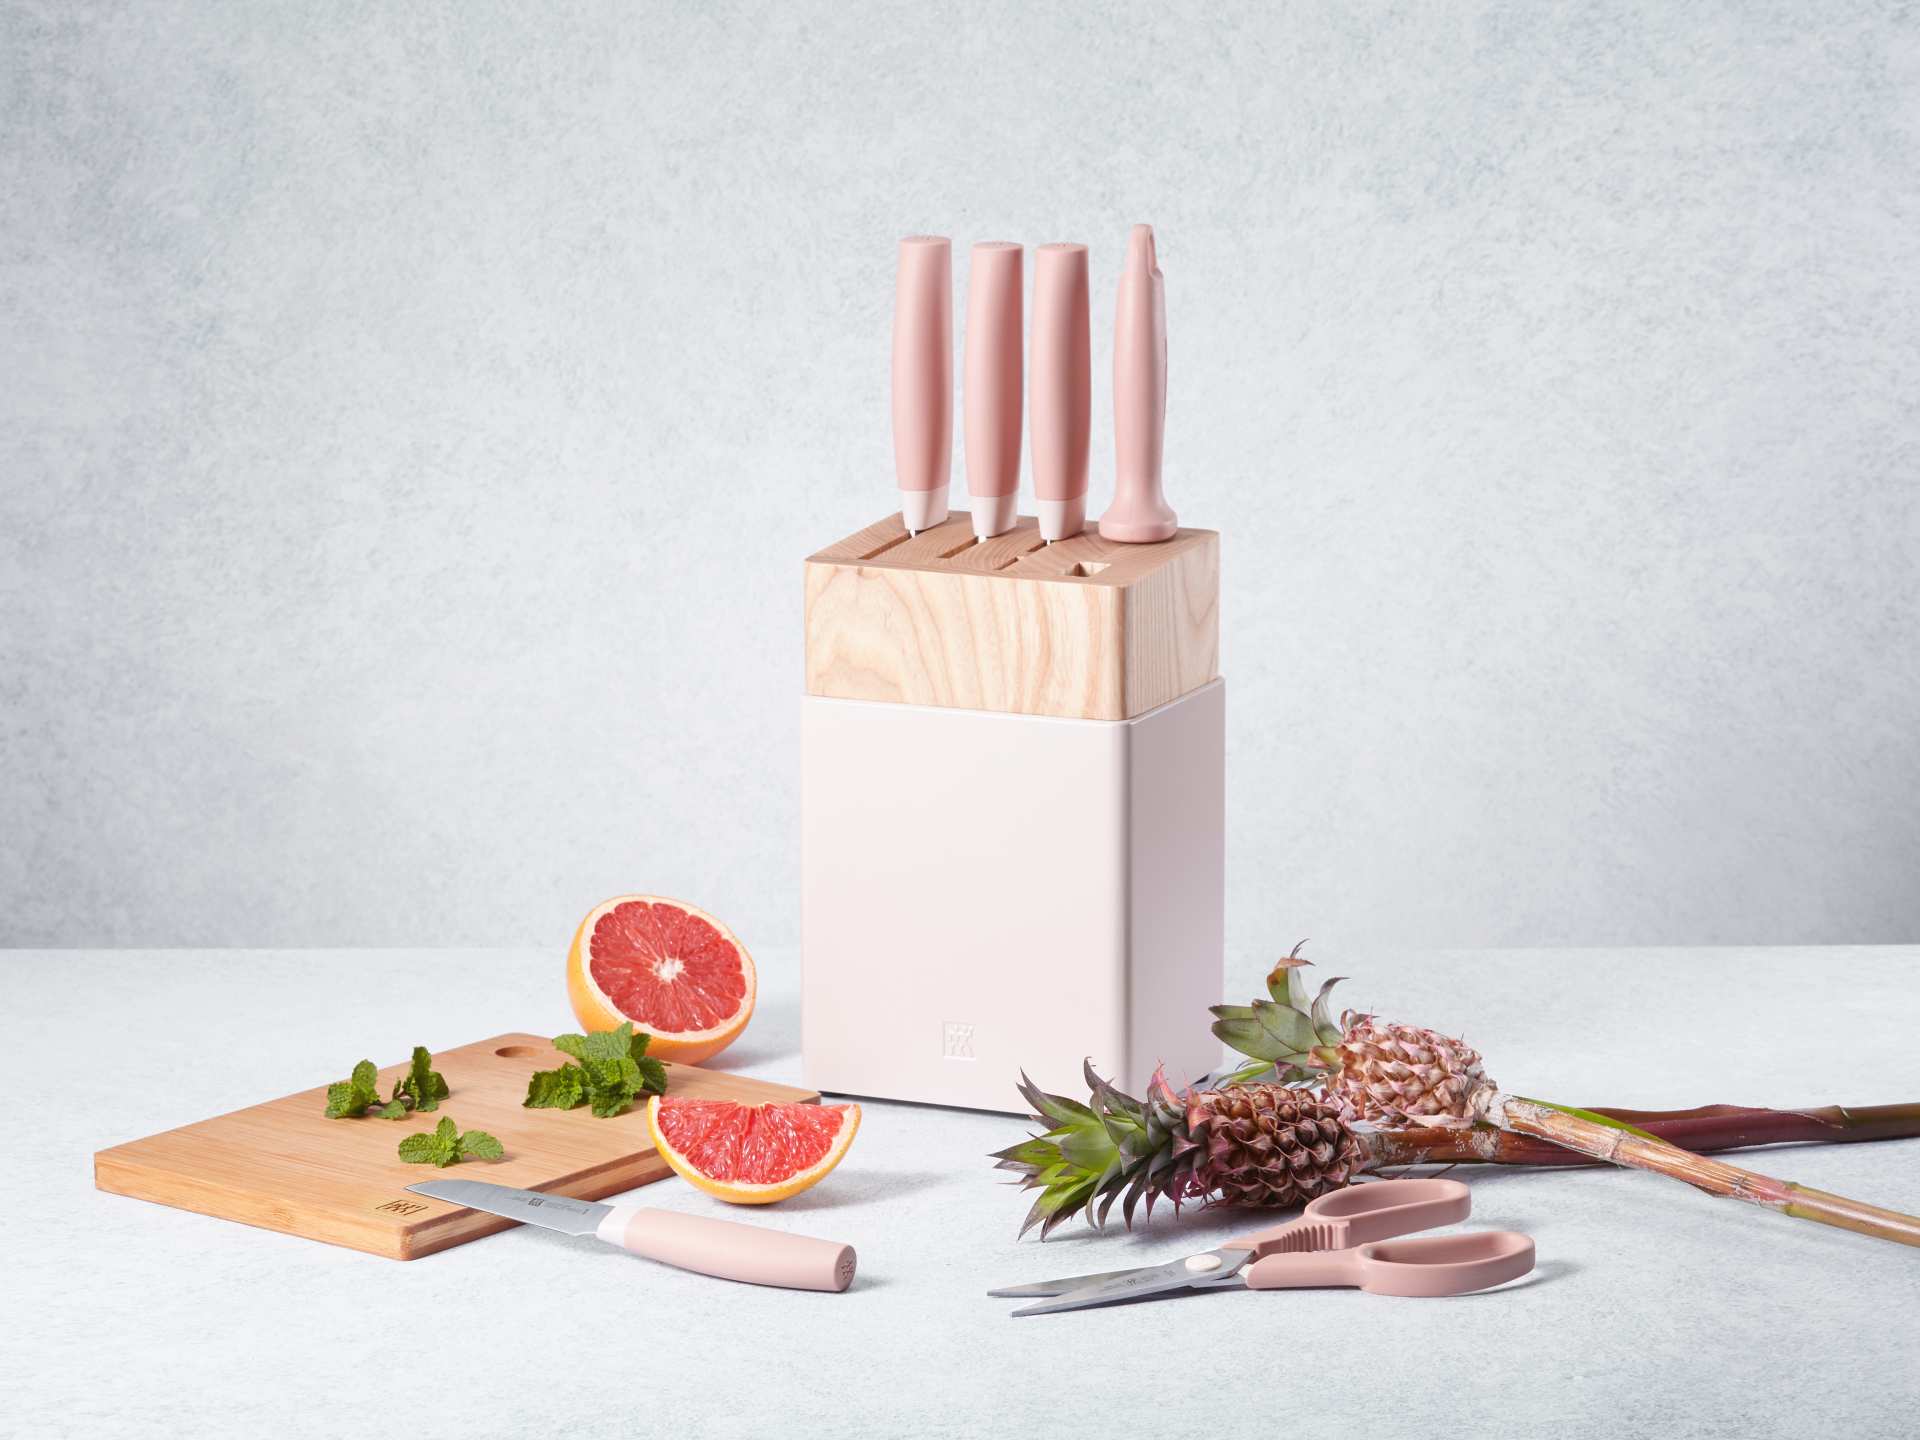 Mother's Day ideas | Zwilling Now S 7-Piece Knife Block Set with grapefruits and pineapple